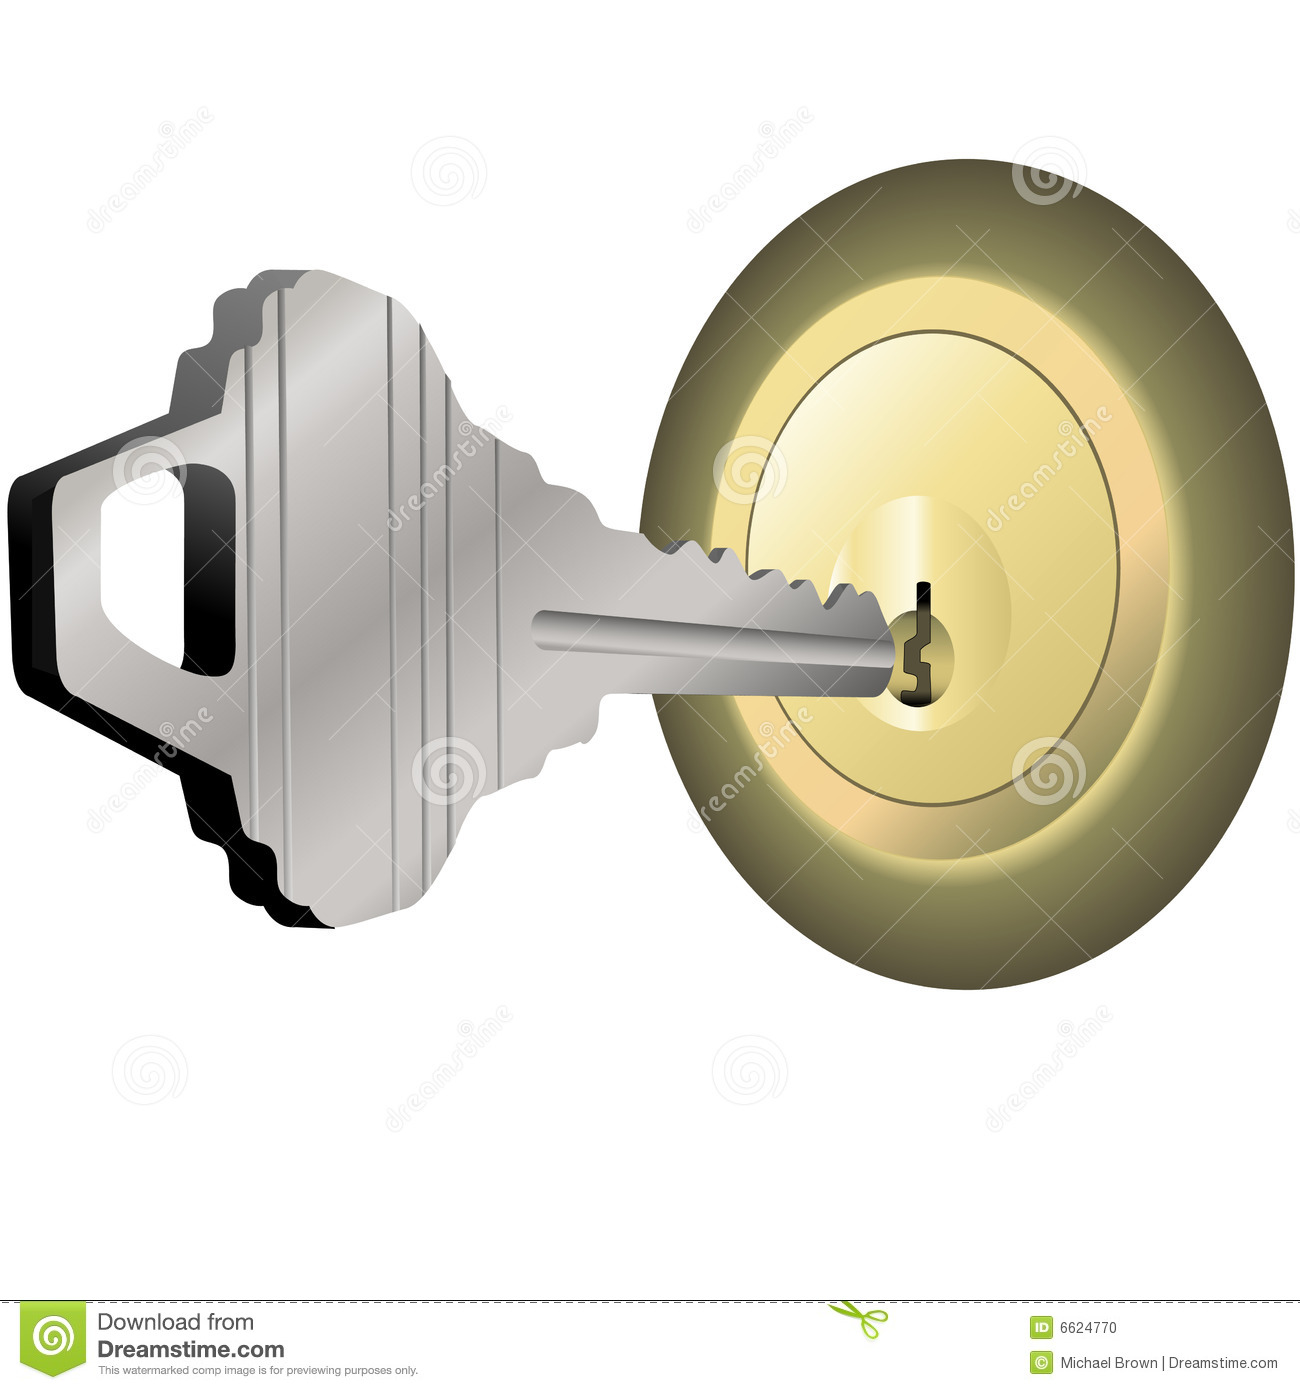 House Key To Unlock Brass Lock For Home Door Stock Photo   Image